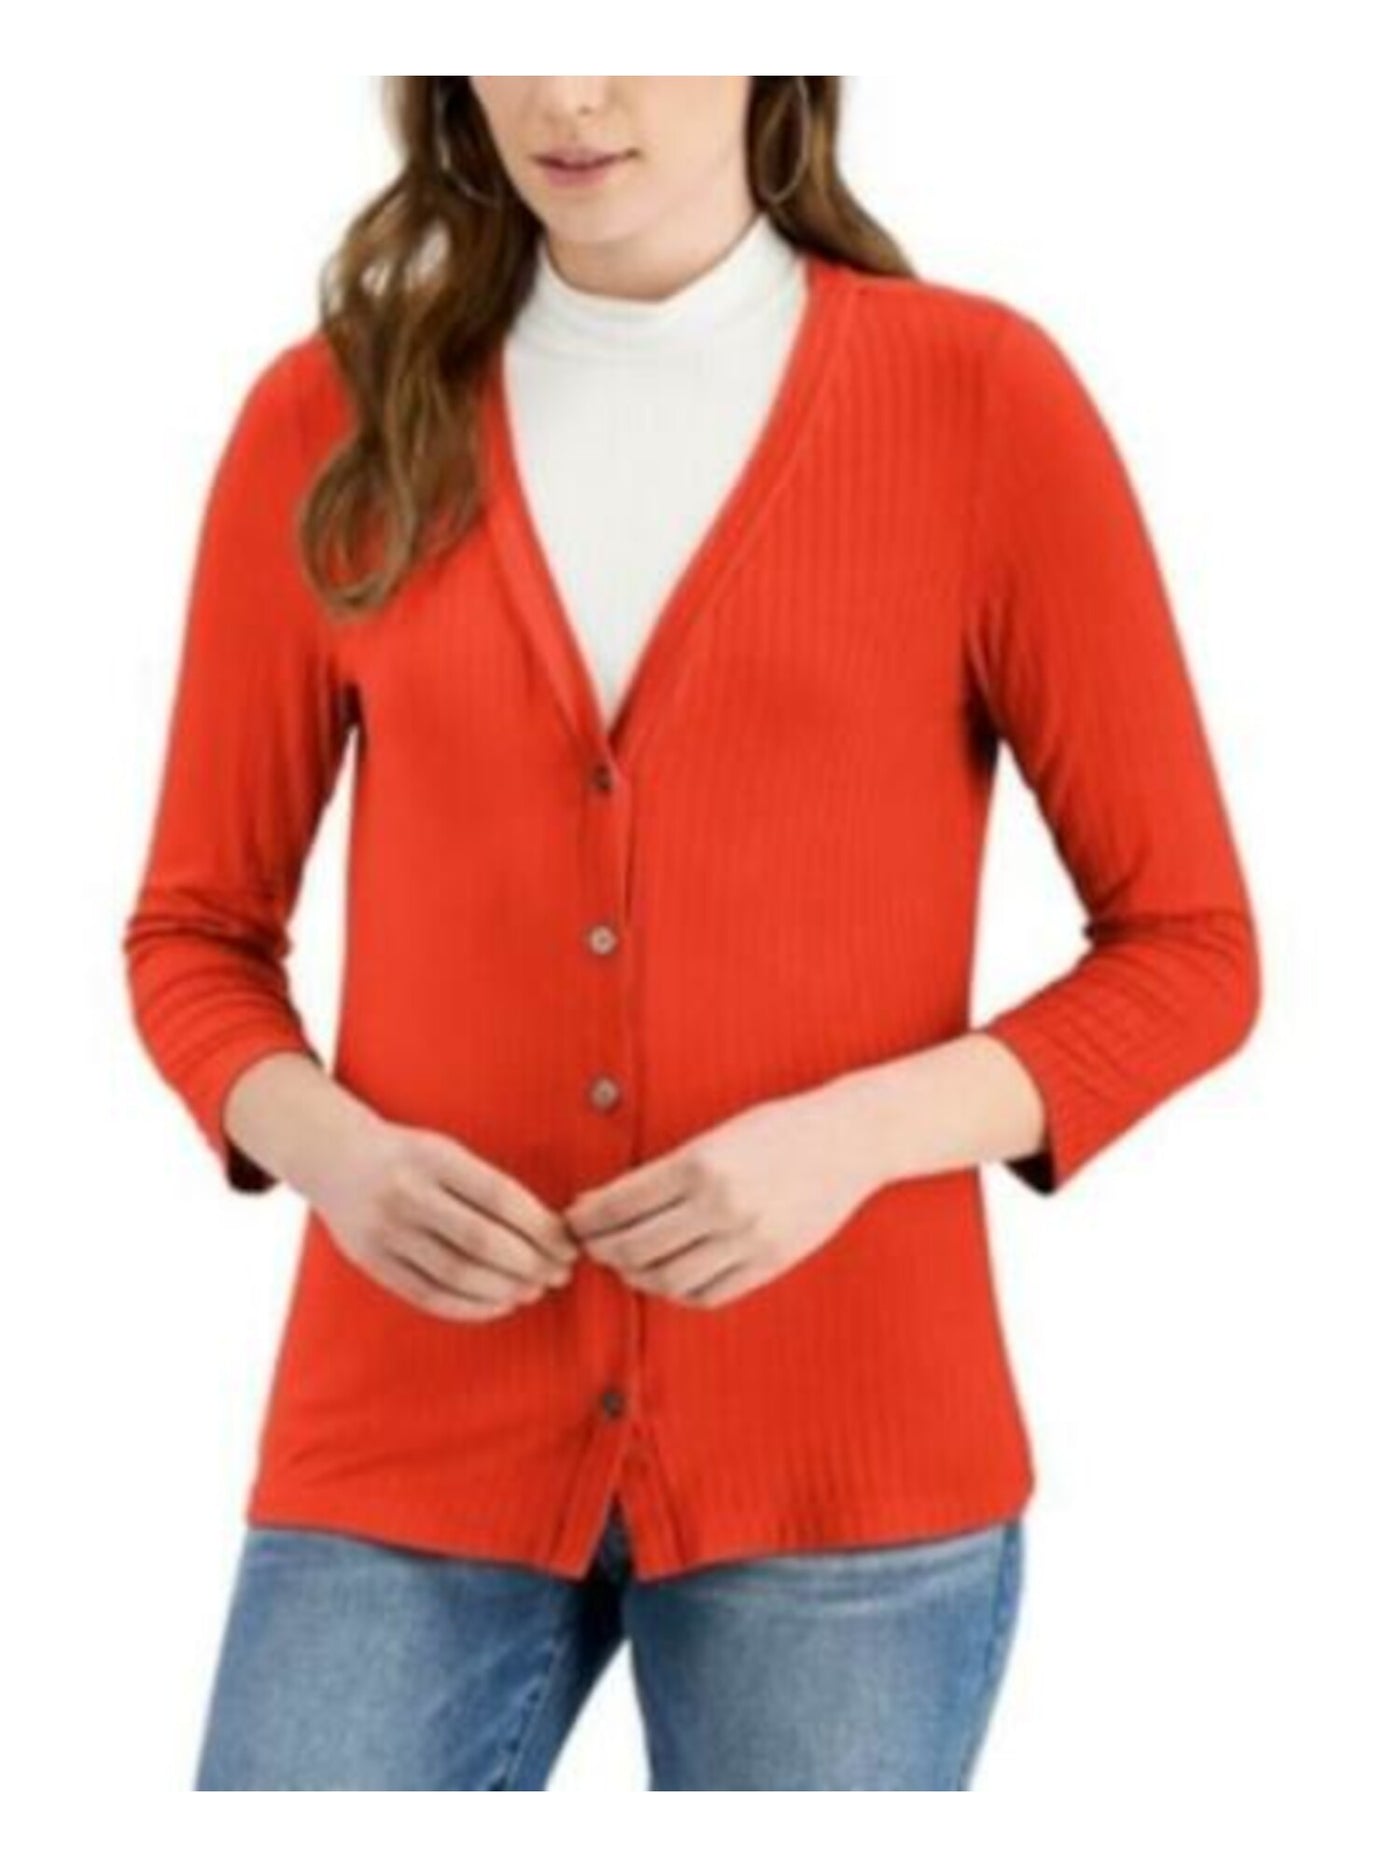 FEVER Womens Orange Ribbed Knit 3/4 Sleeve V Neck Button Up Top XS